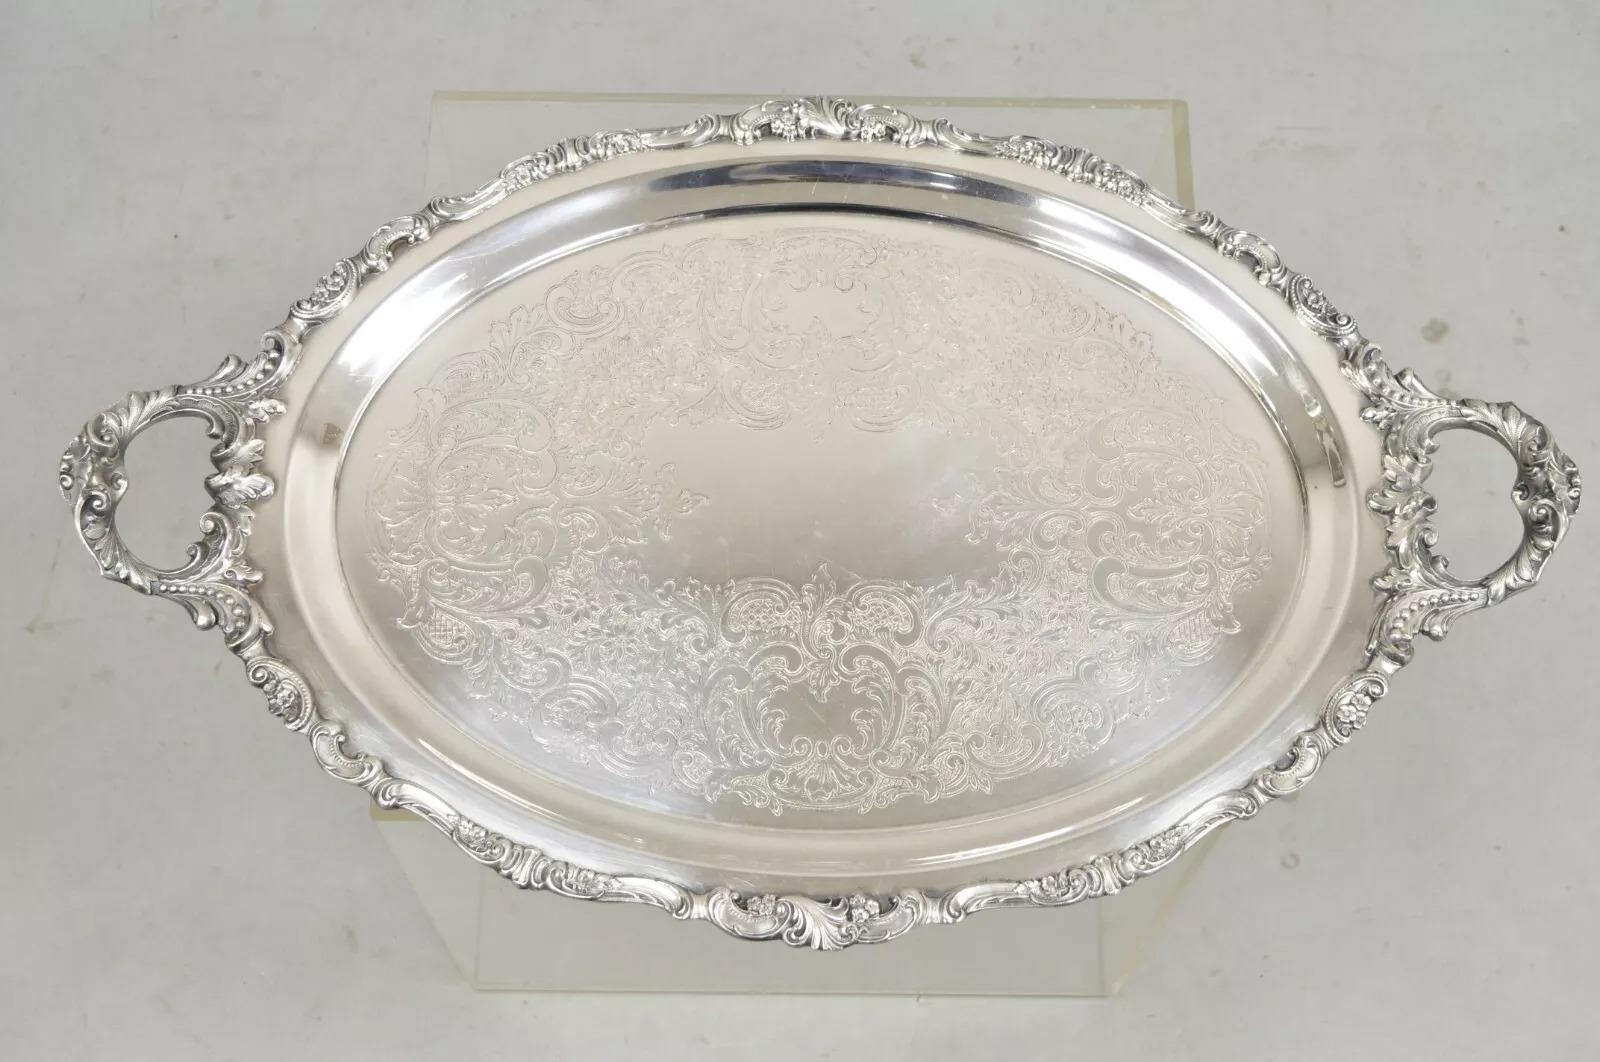 Vintage Baroque by Wallace Oval Silver Plated Victorian Style Serving Platter Tray. Item features ornate handles, nice heavy construction, original hallmark. Circa Mid 20th Century. Measurements: 2